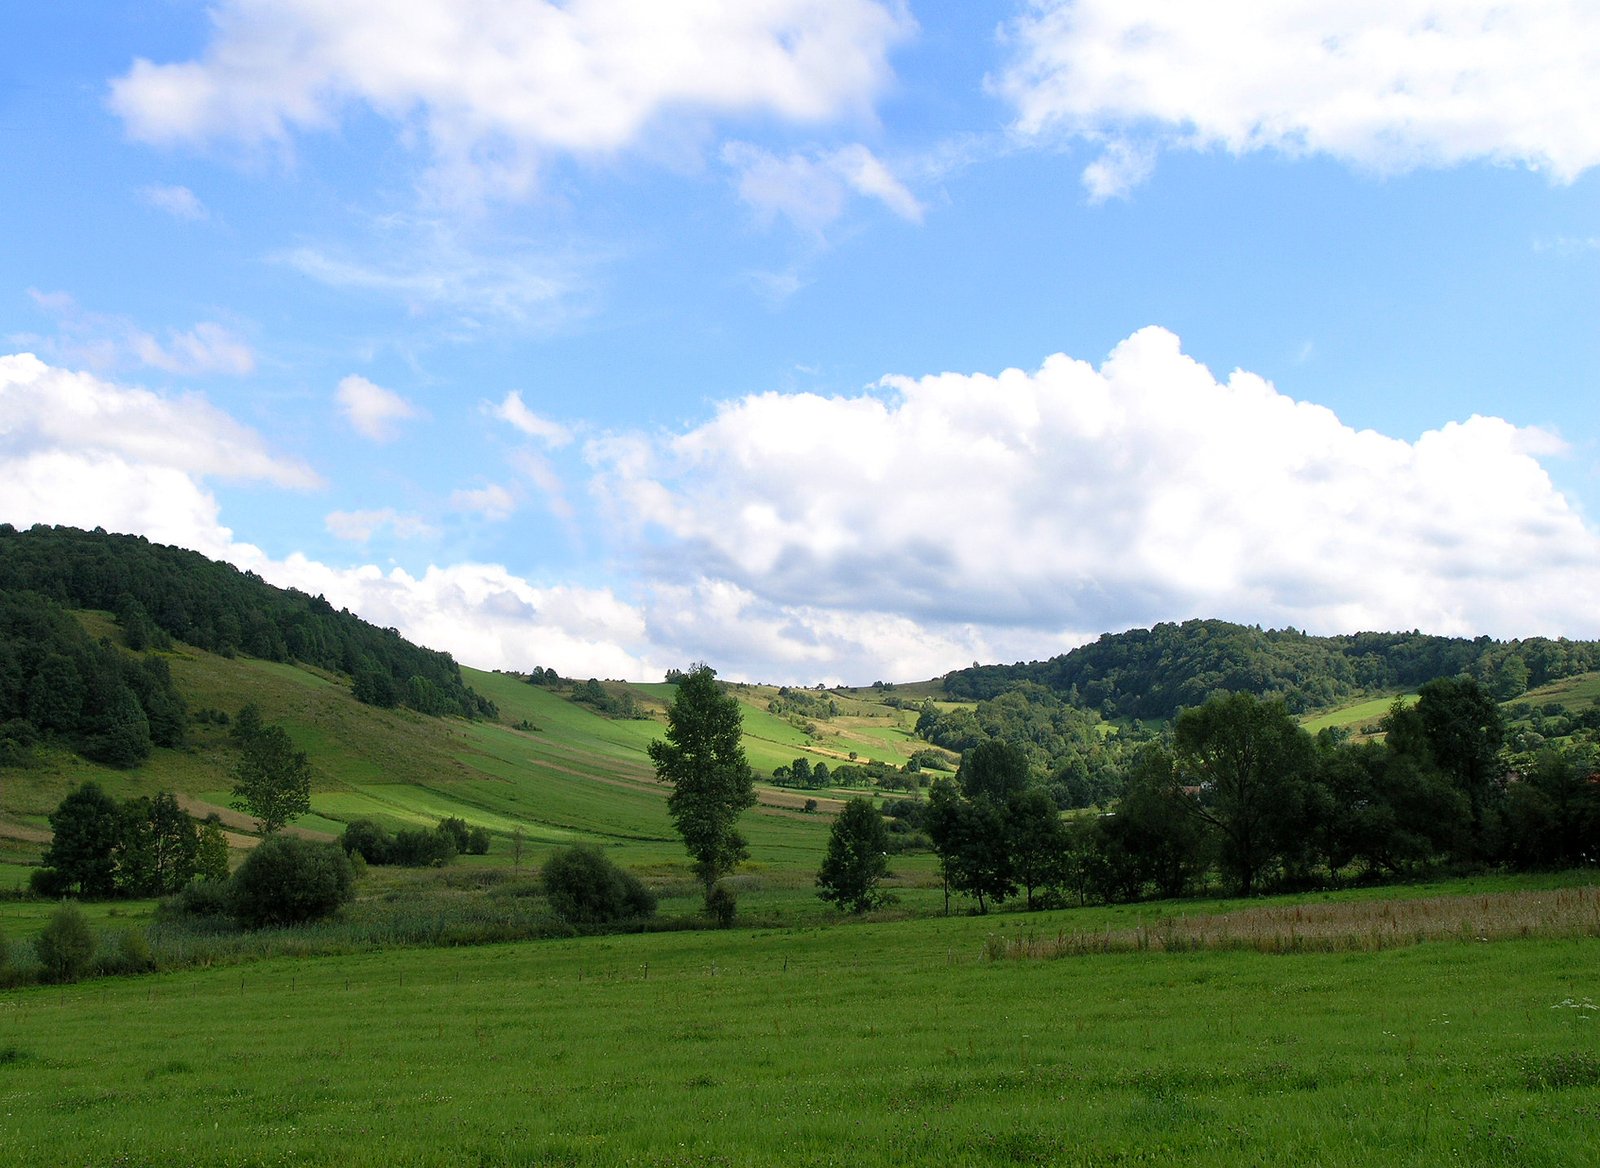 this is a picture of a grassy field and some hills